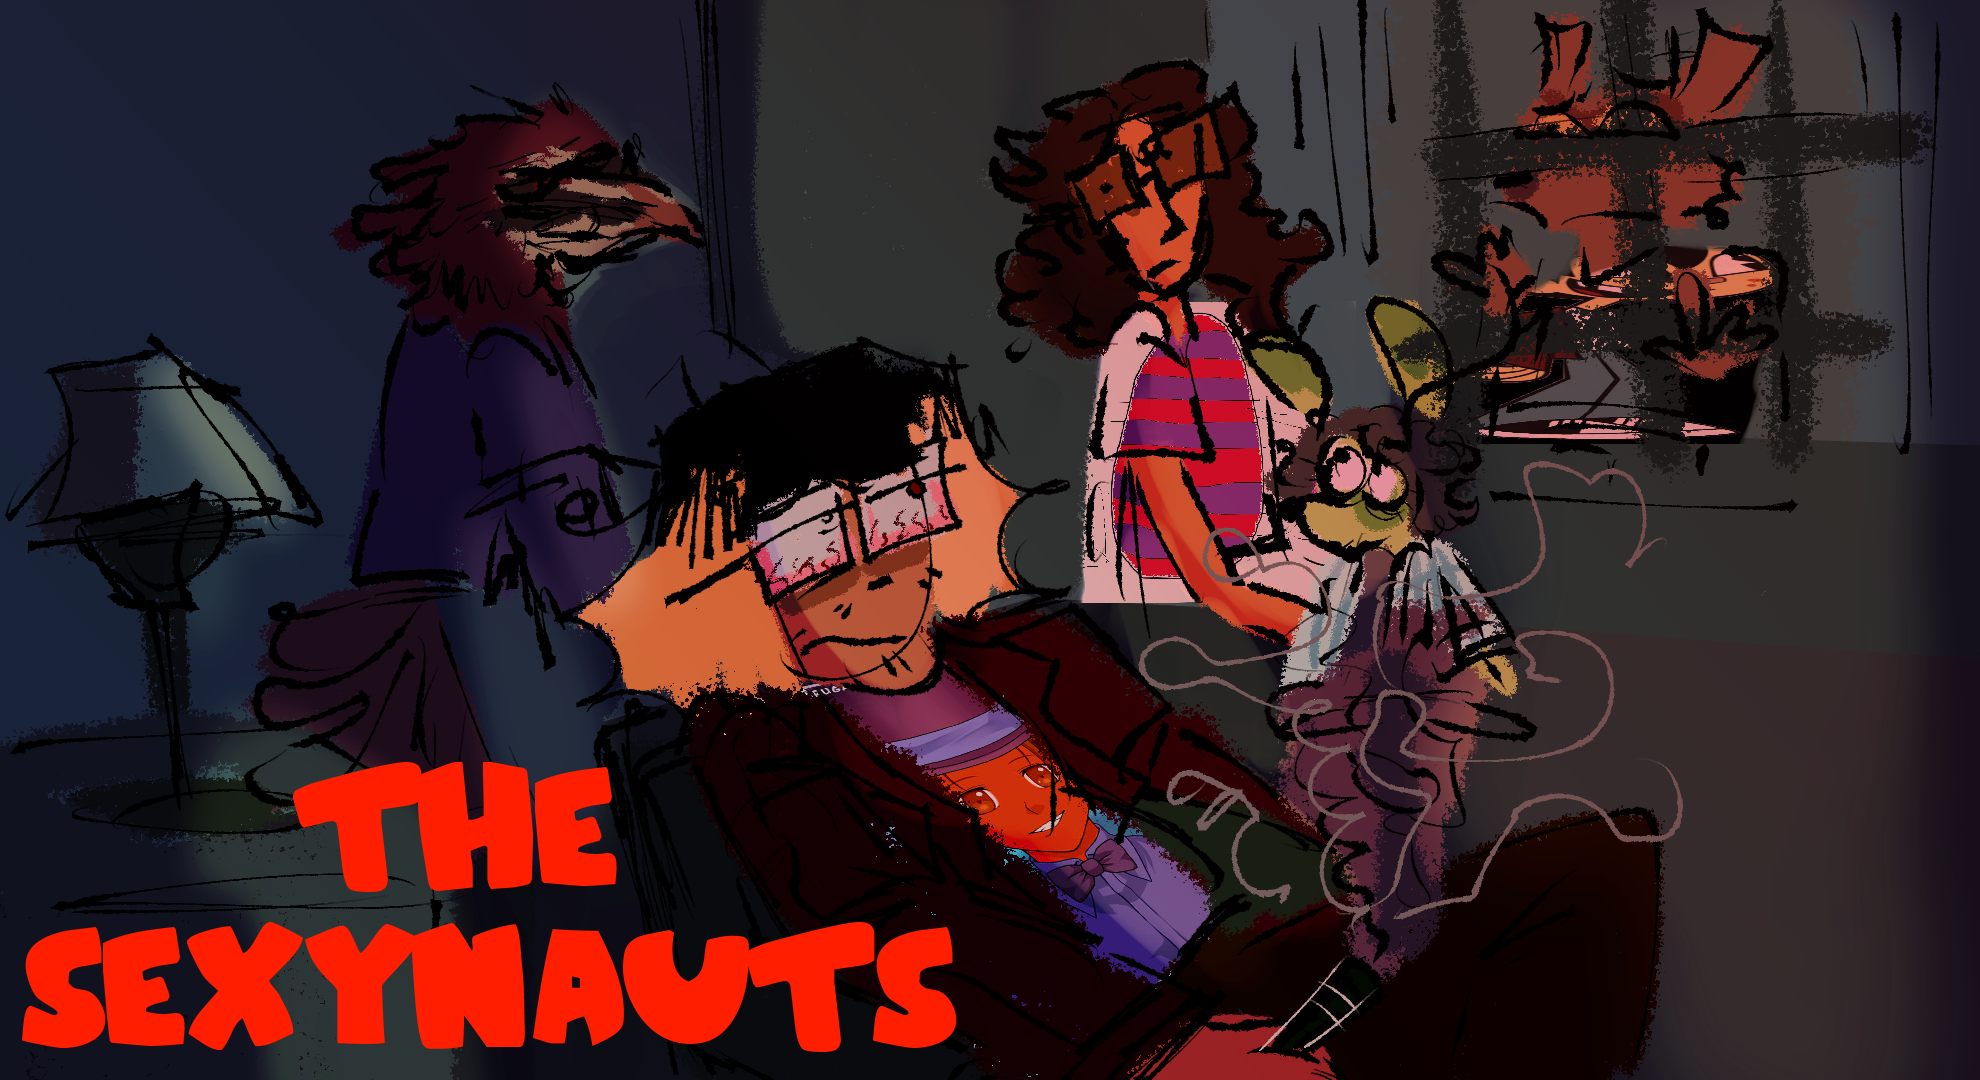 a redraw of a simpsons image replaced with the sexynauts with the text 'the sexynuats' by Martin